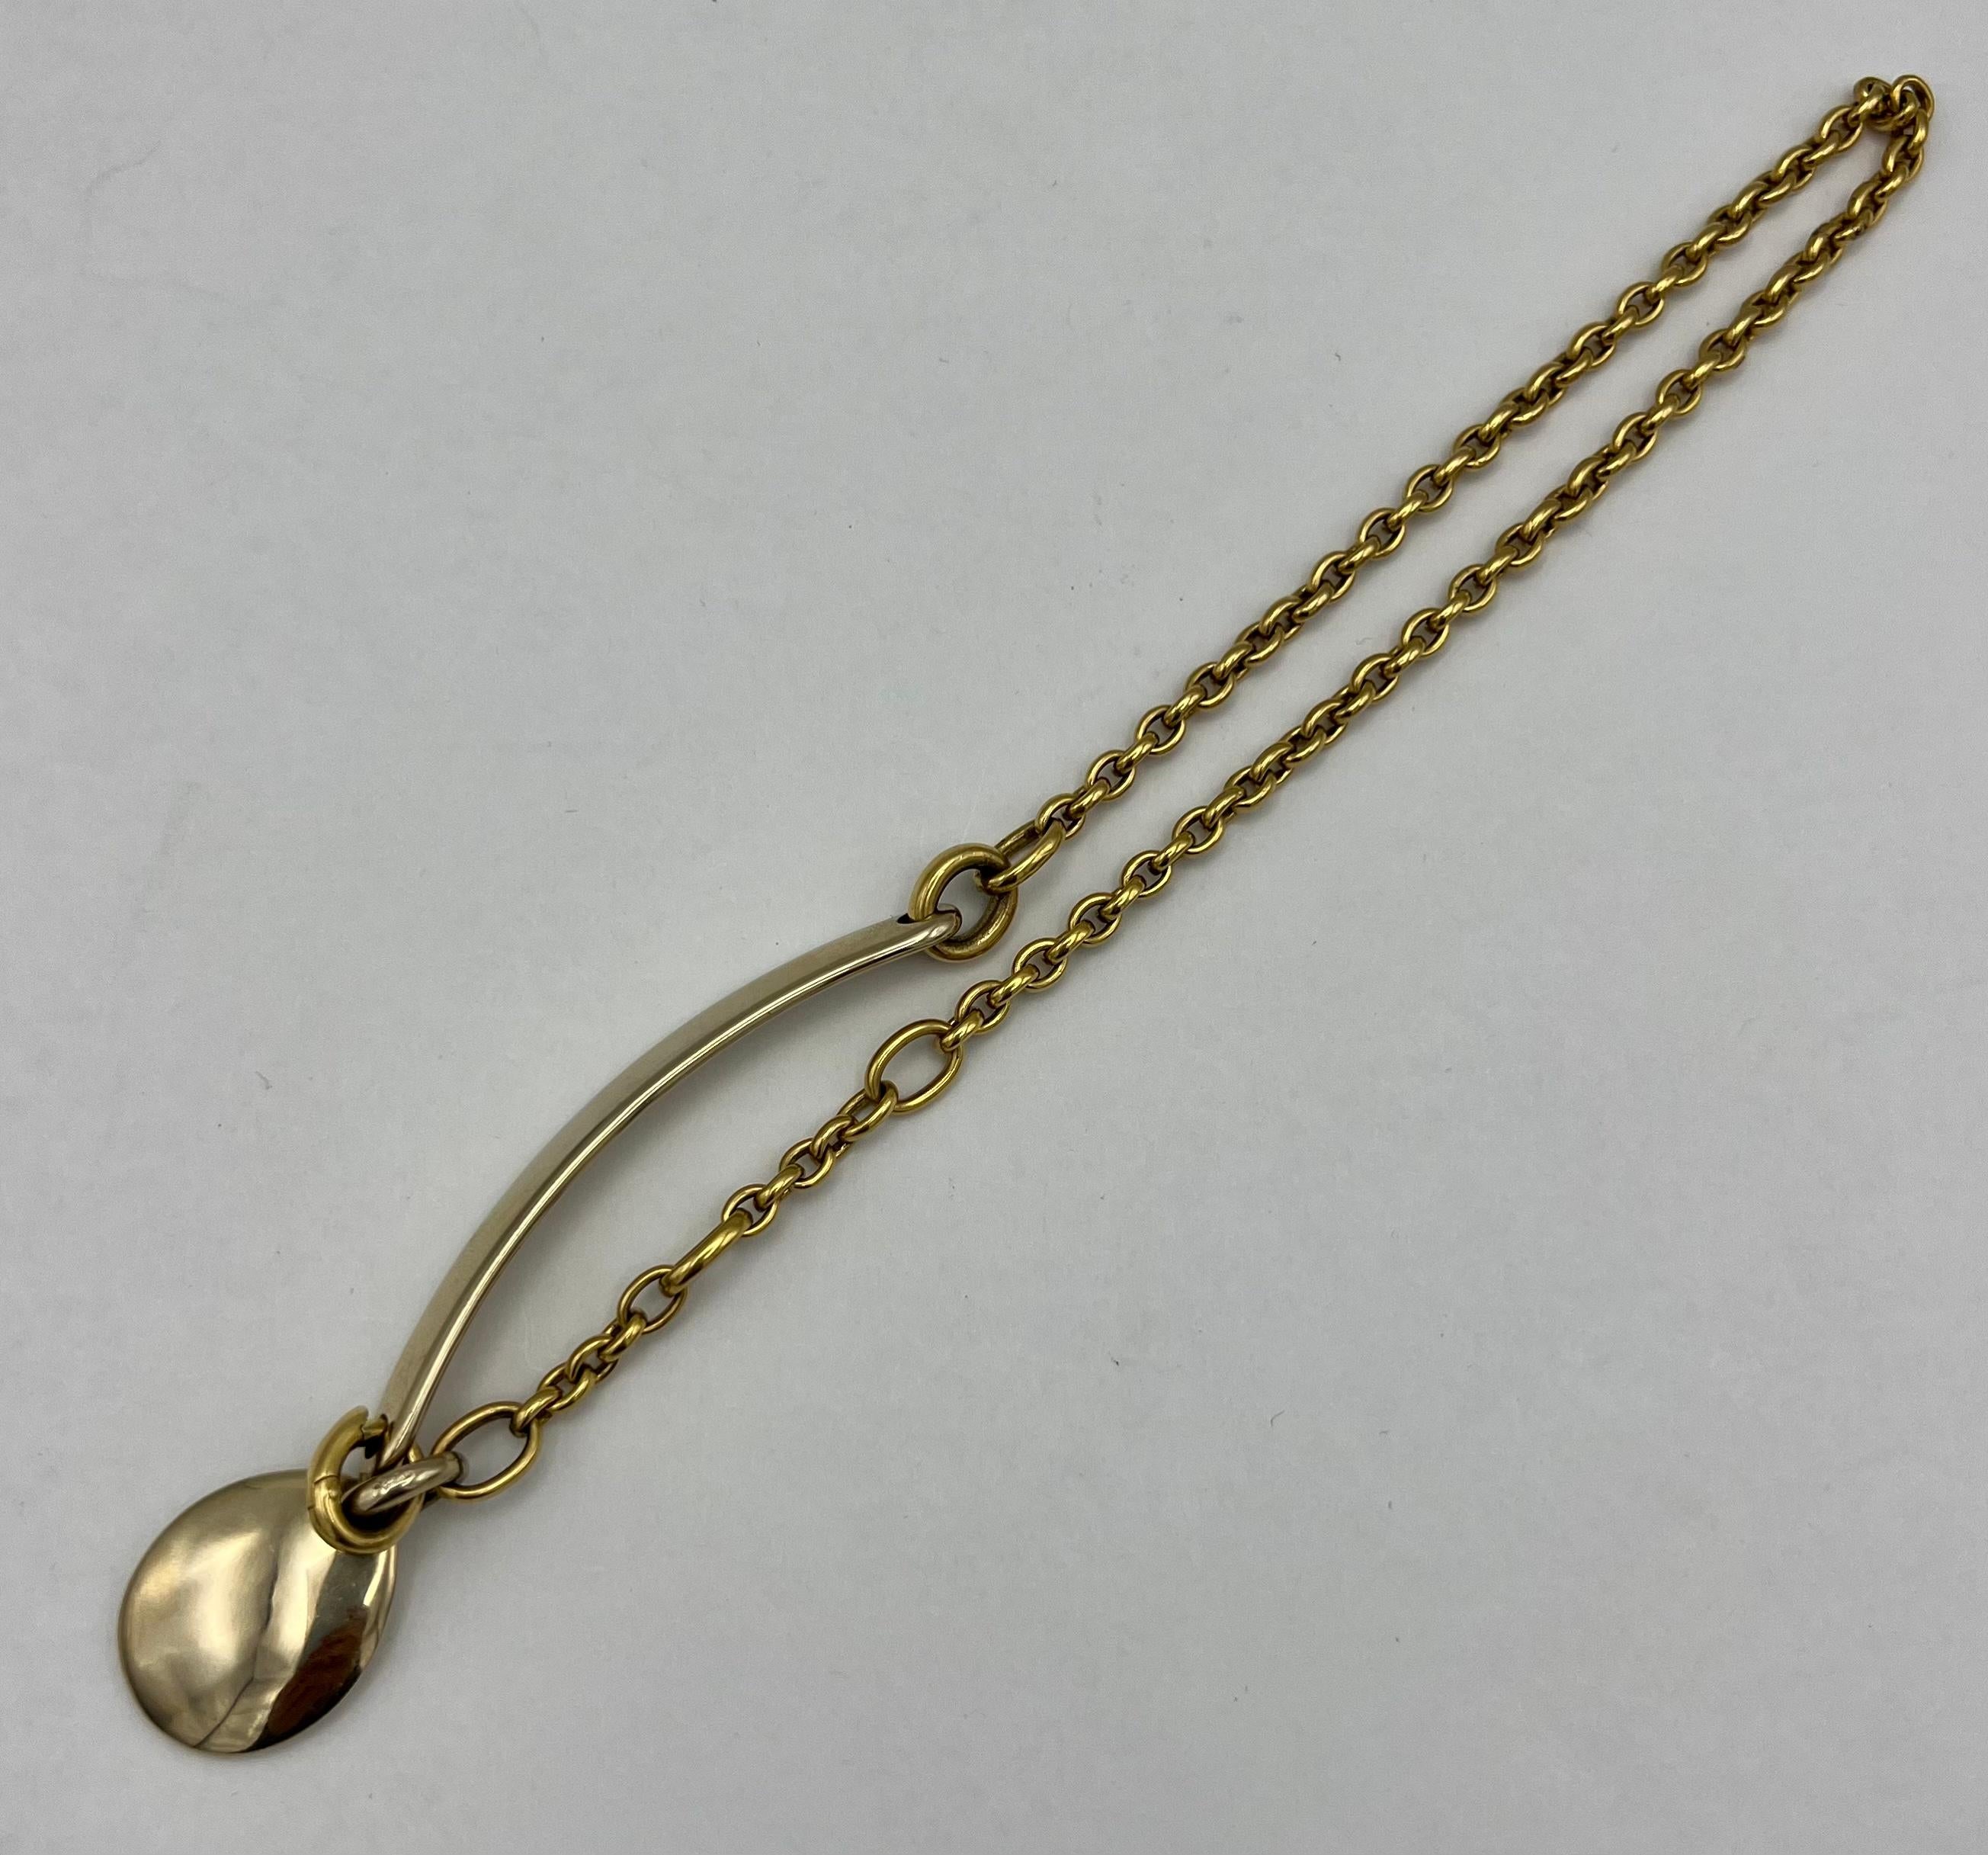 - The necklace is made out of 18K yellow gold
- Features oval links and drop pendant detail
- Hinged clip clasp closure

Hallmarks: Pomellato, 750
Total weight is 66.7 grams
Measurements: 13 inches long